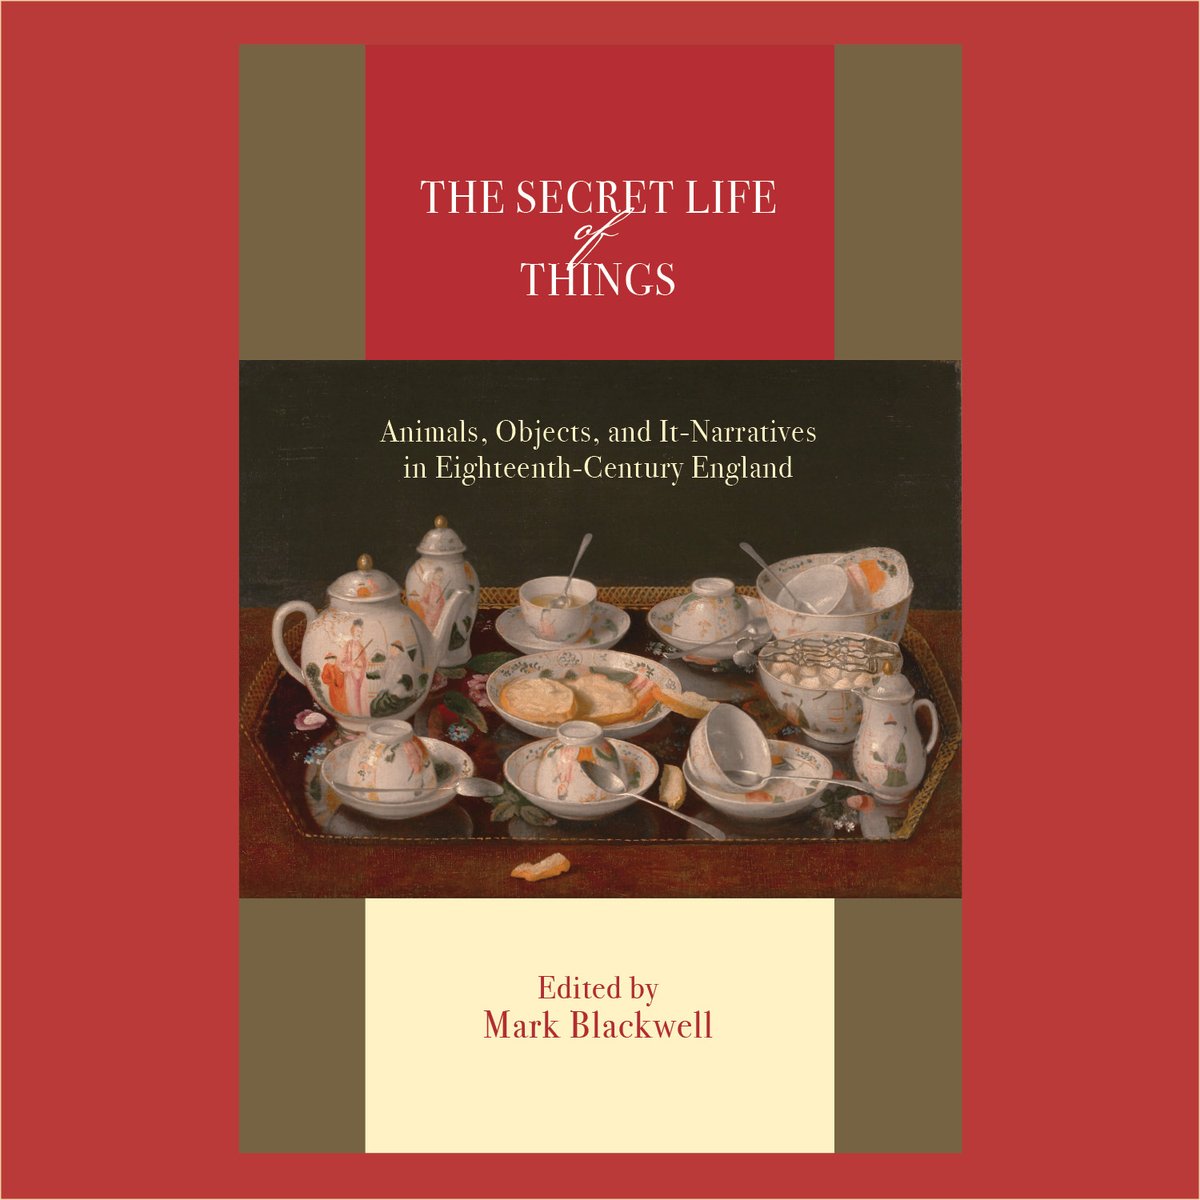 “The Secret Life of Things: Animals, Objects, and It-Narratives in Eighteenth-Century England”
Edited by Mark Blackwell

rutgersuniversitypress.org/bucknell/the-s…

#NewBookAnnouncement #LiteraryStudies Published by @BucknellUPress #BucknellUniversityPress